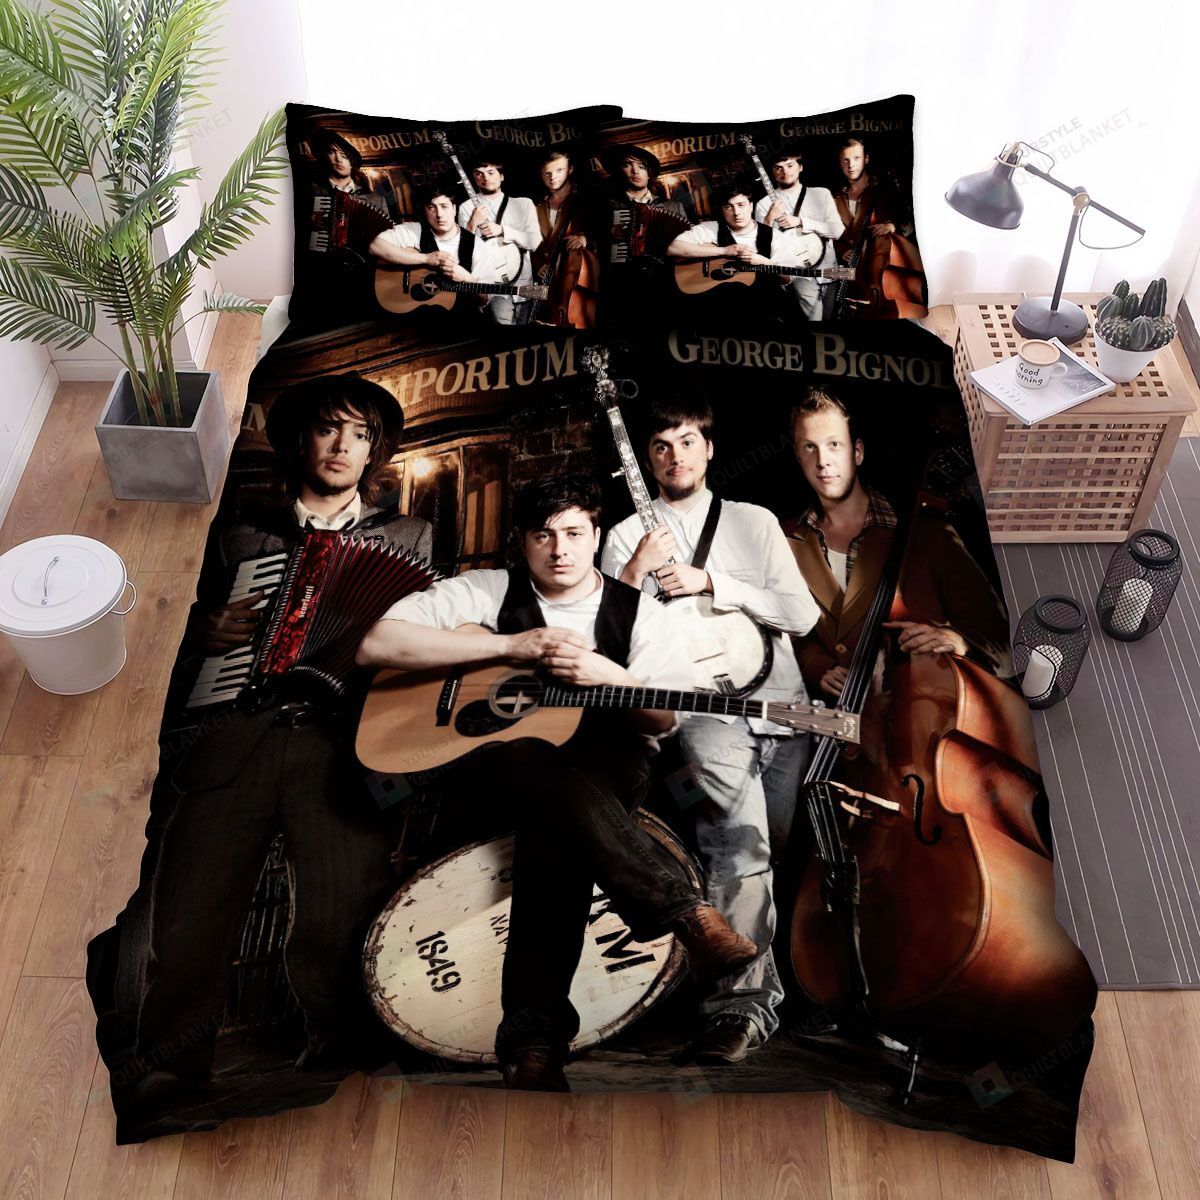 Mumford & Sons The Incredible Rise Bed Sheets Spread Comforter Duvet Cover Bedding Sets